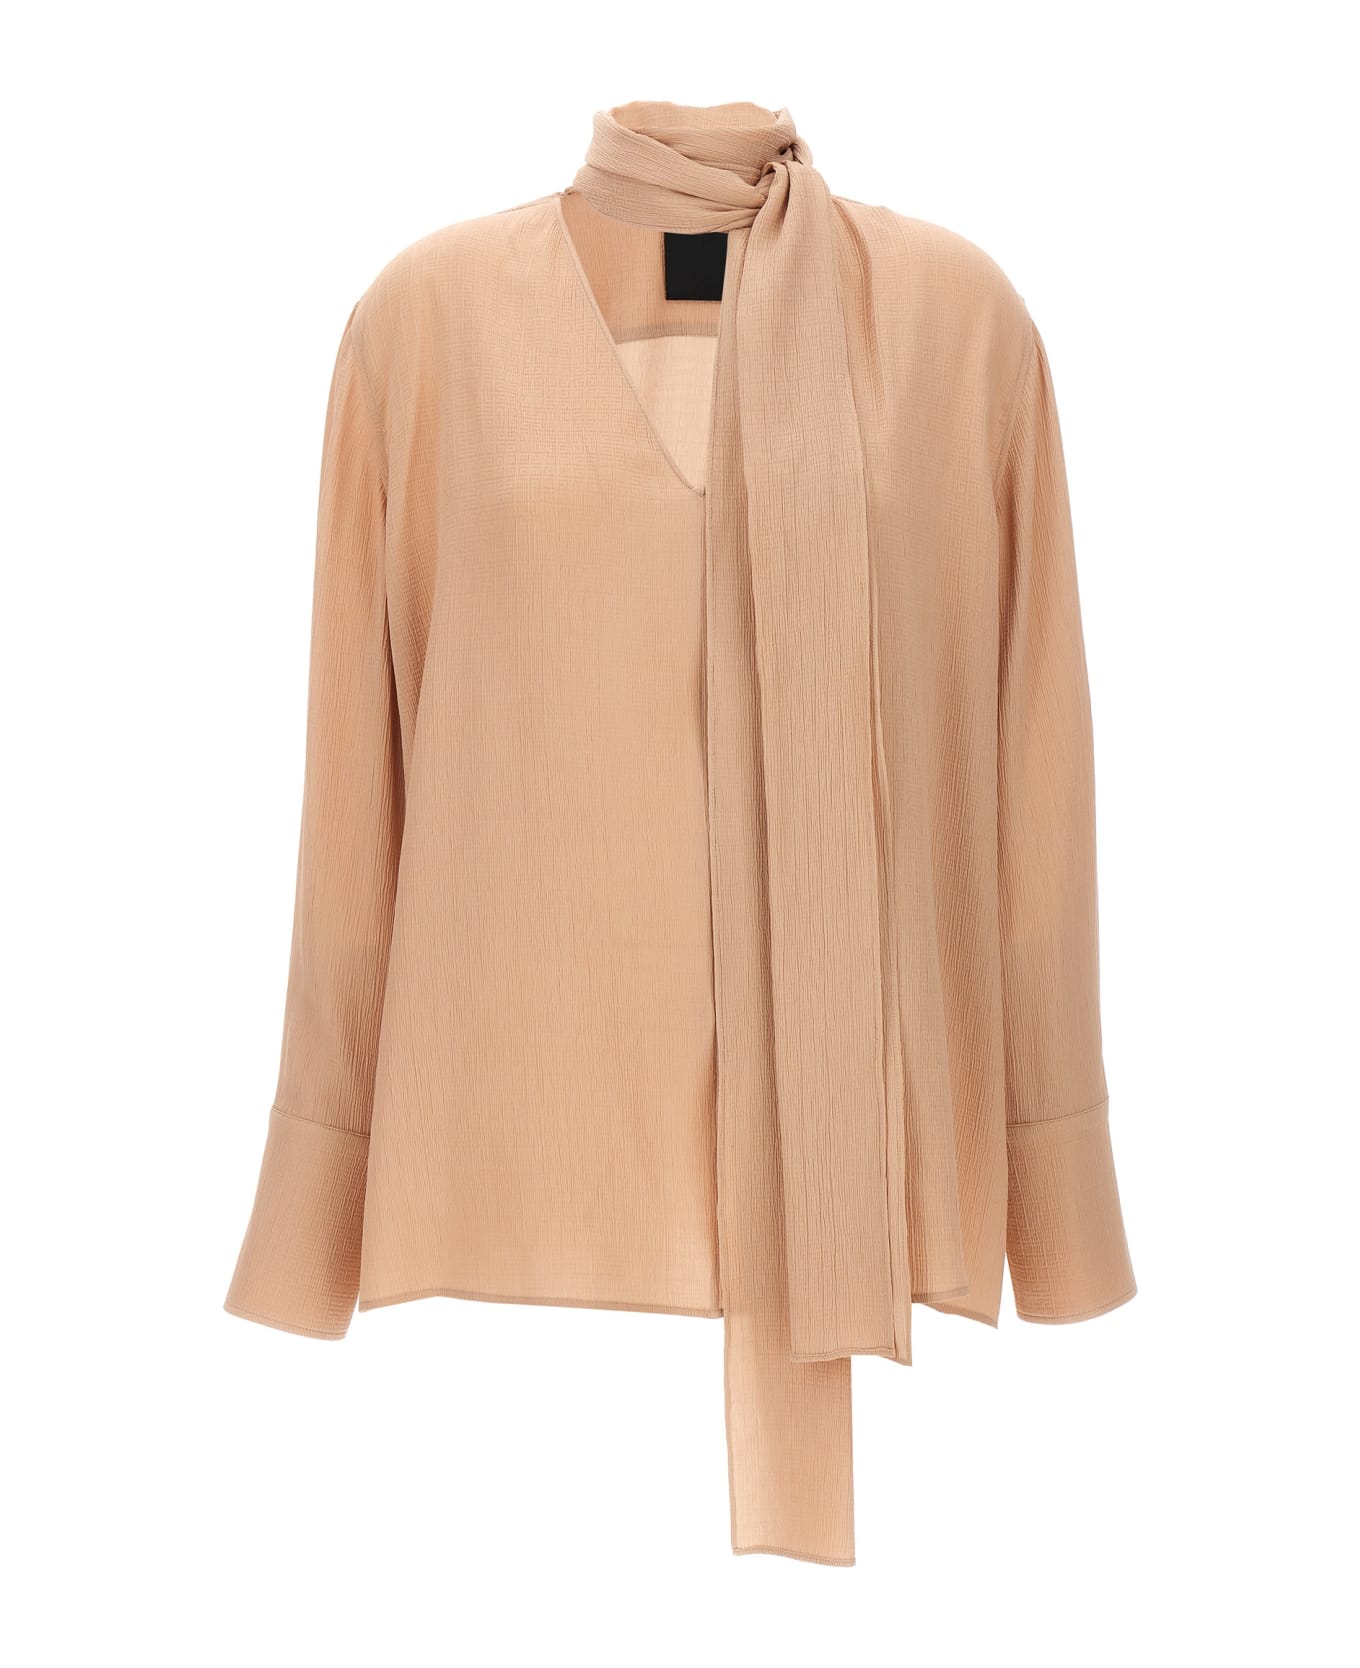 Givenchy Pussy Bow Blouse - Beige シャツ